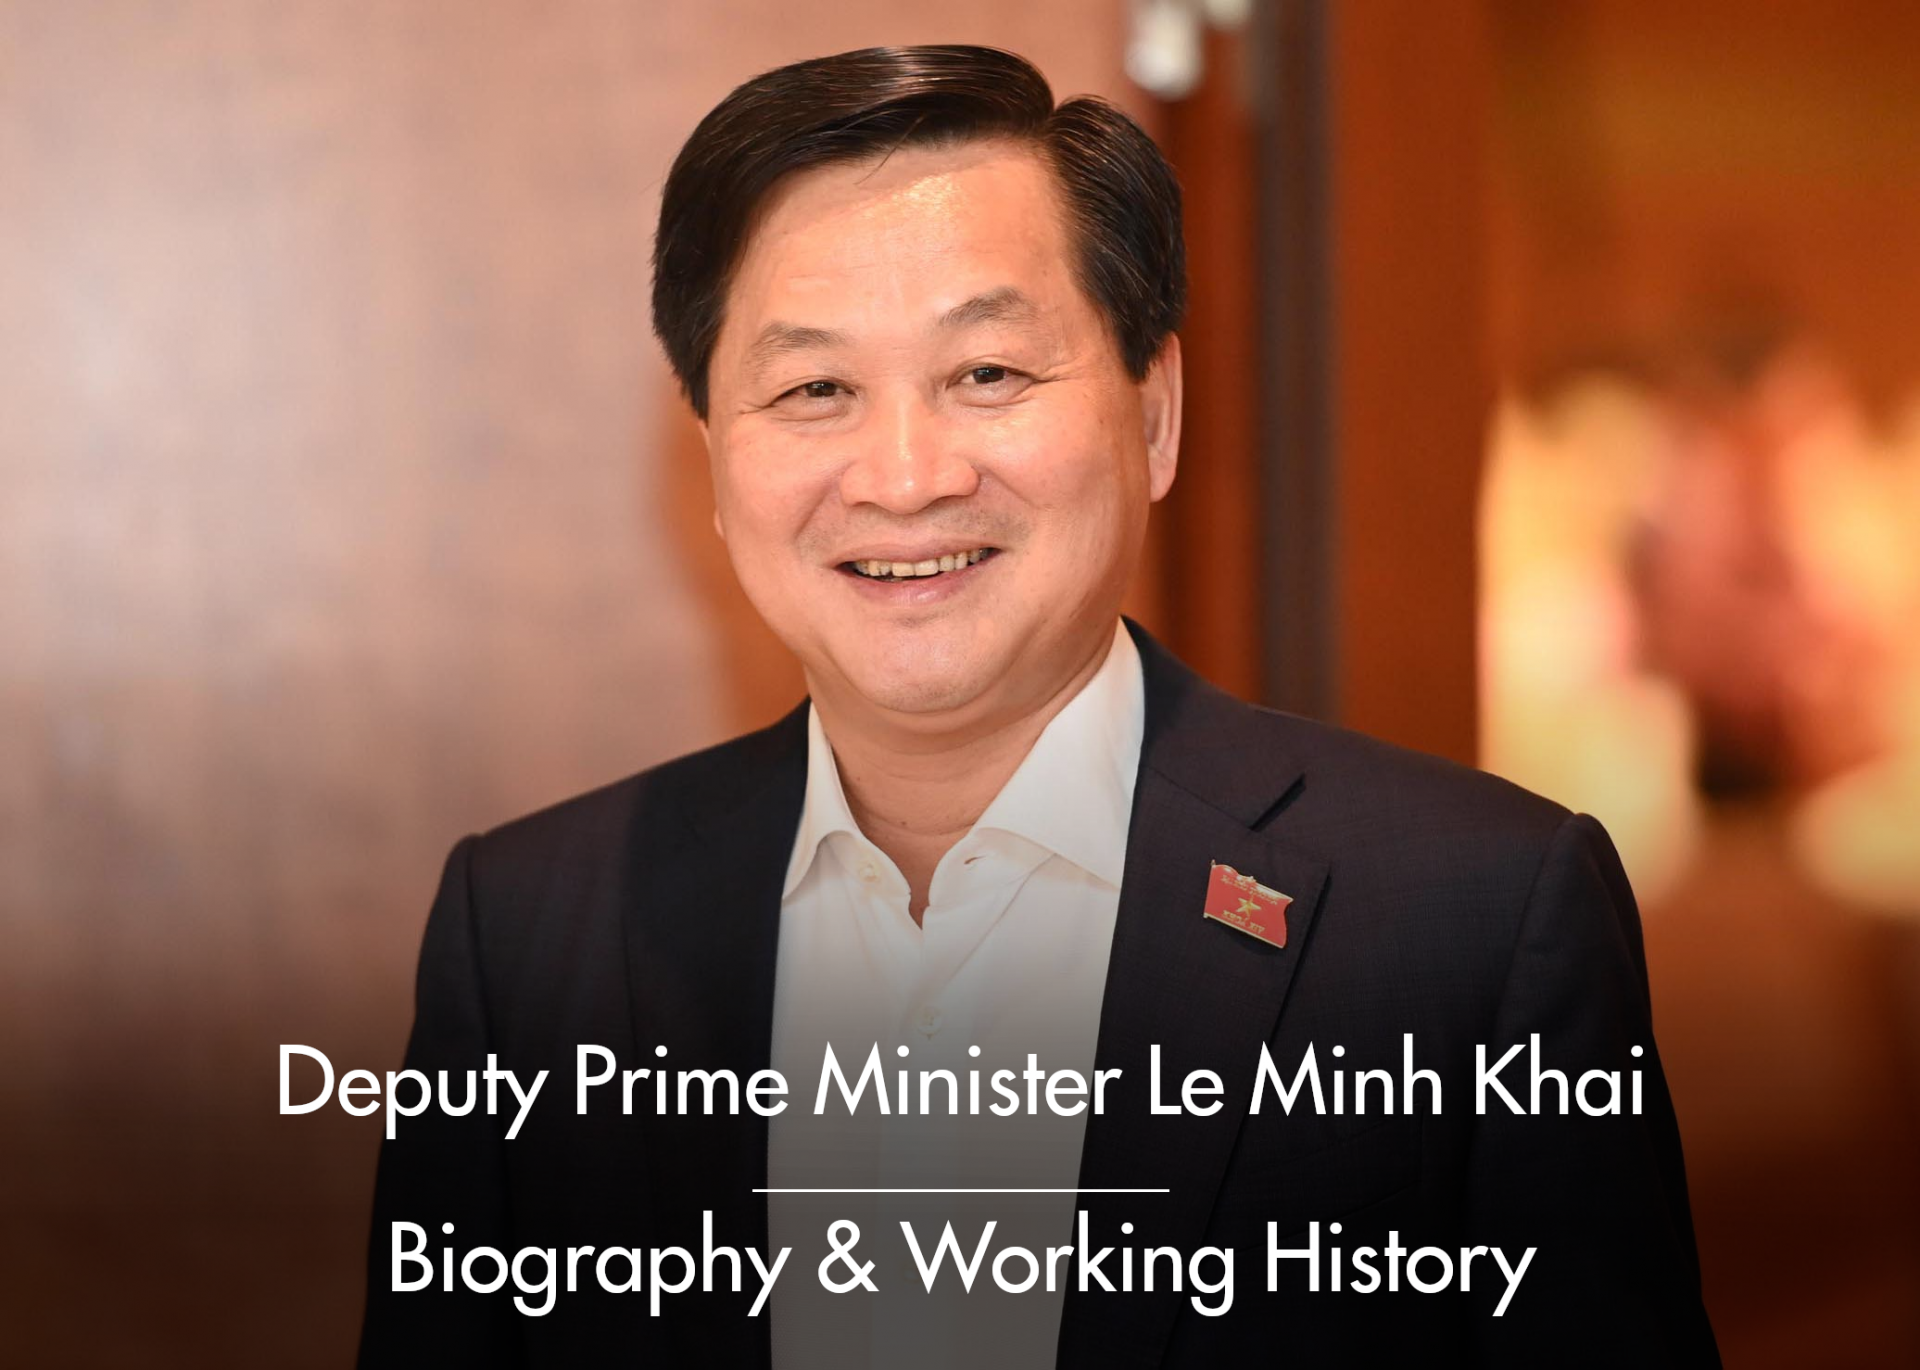 Biography of Deputy Prime Minister Le Minh Khai: Positions and Working History